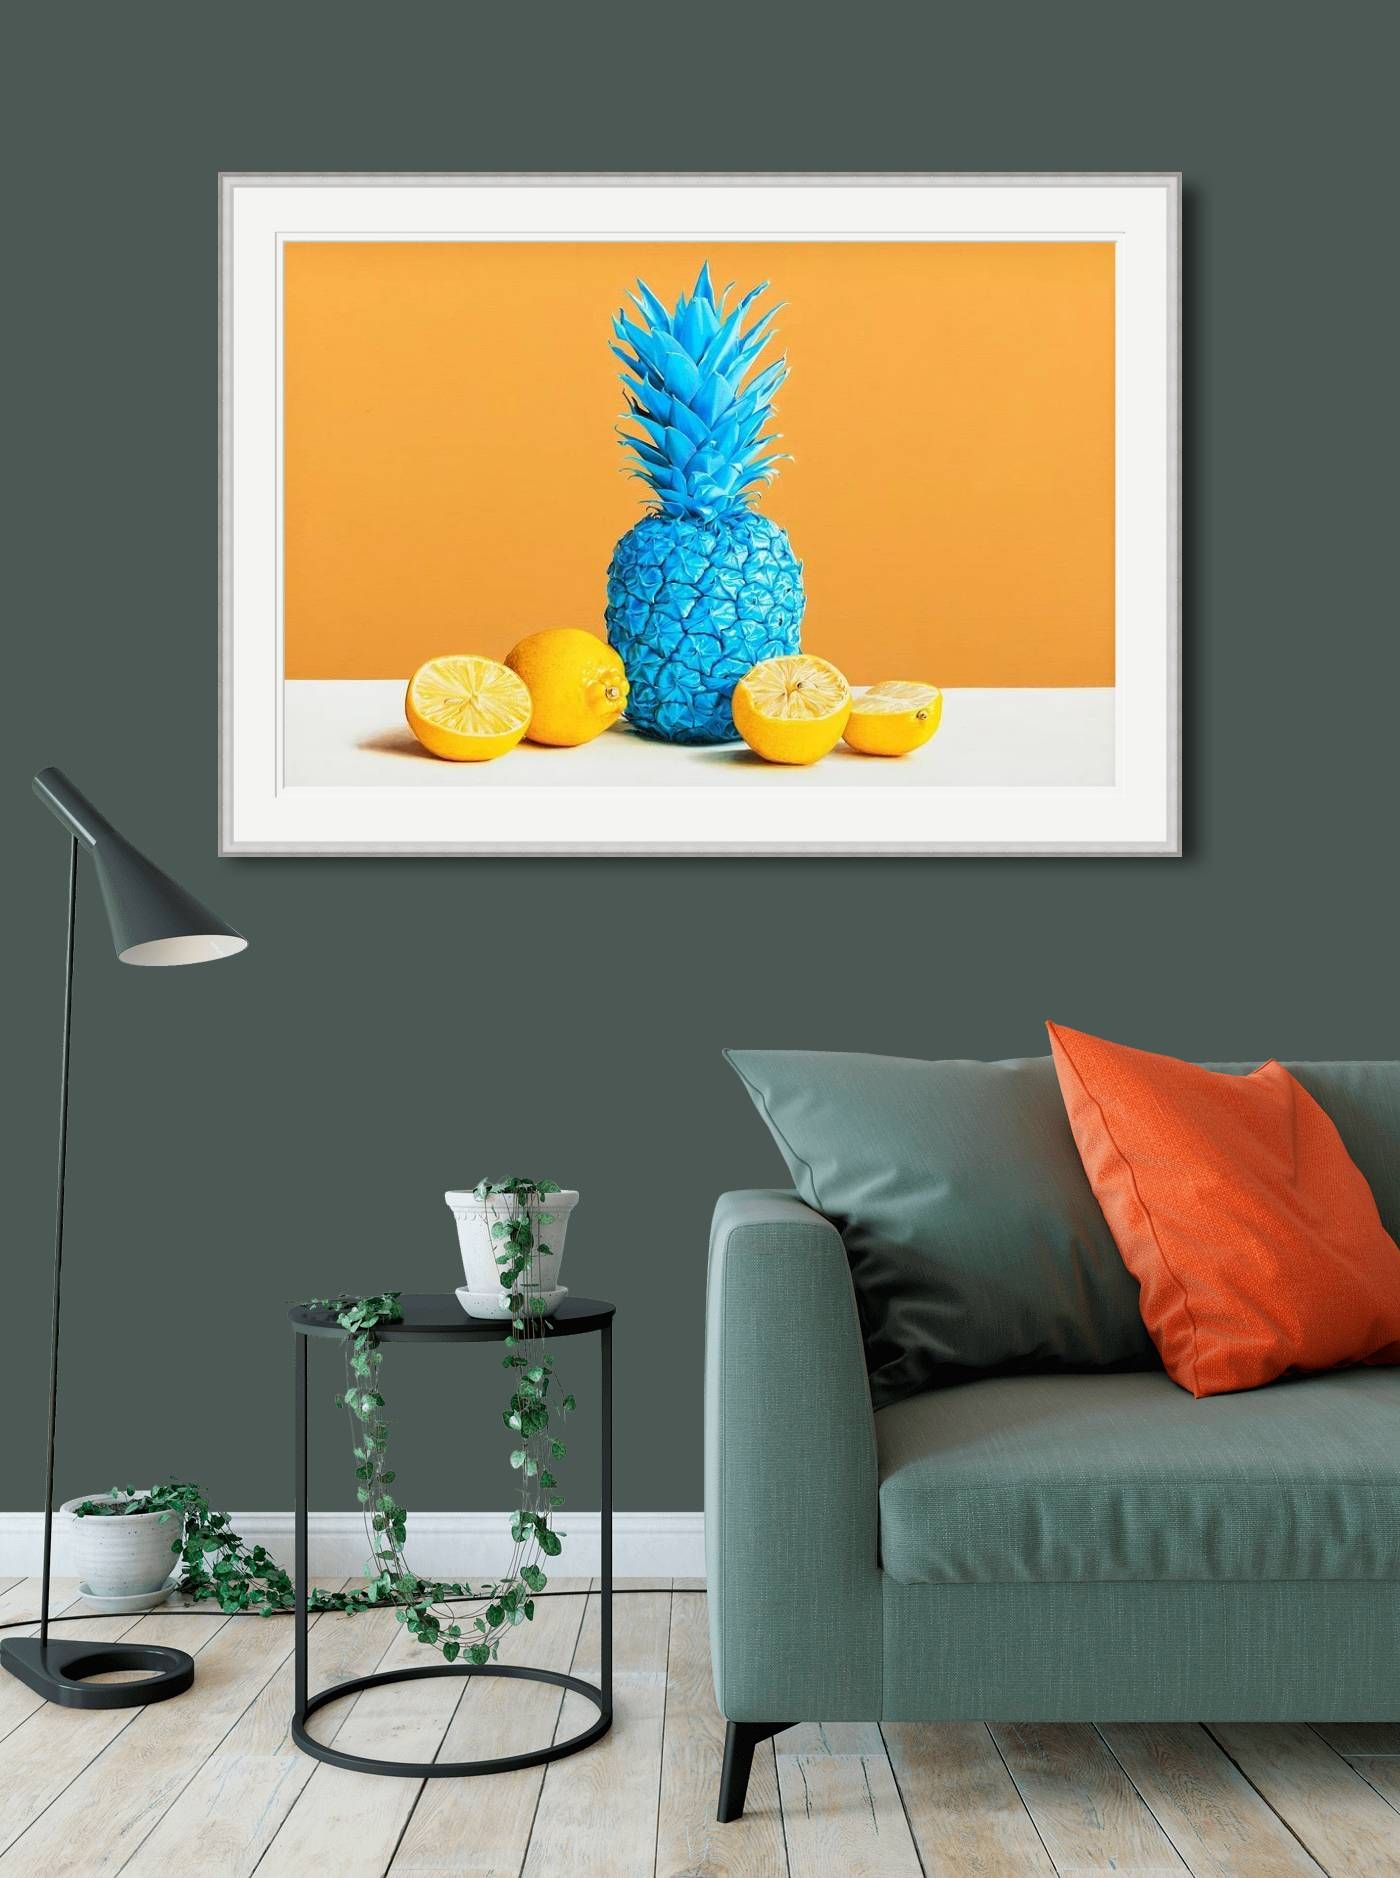 Large  - Blue Pineapple by Stephen Johntson